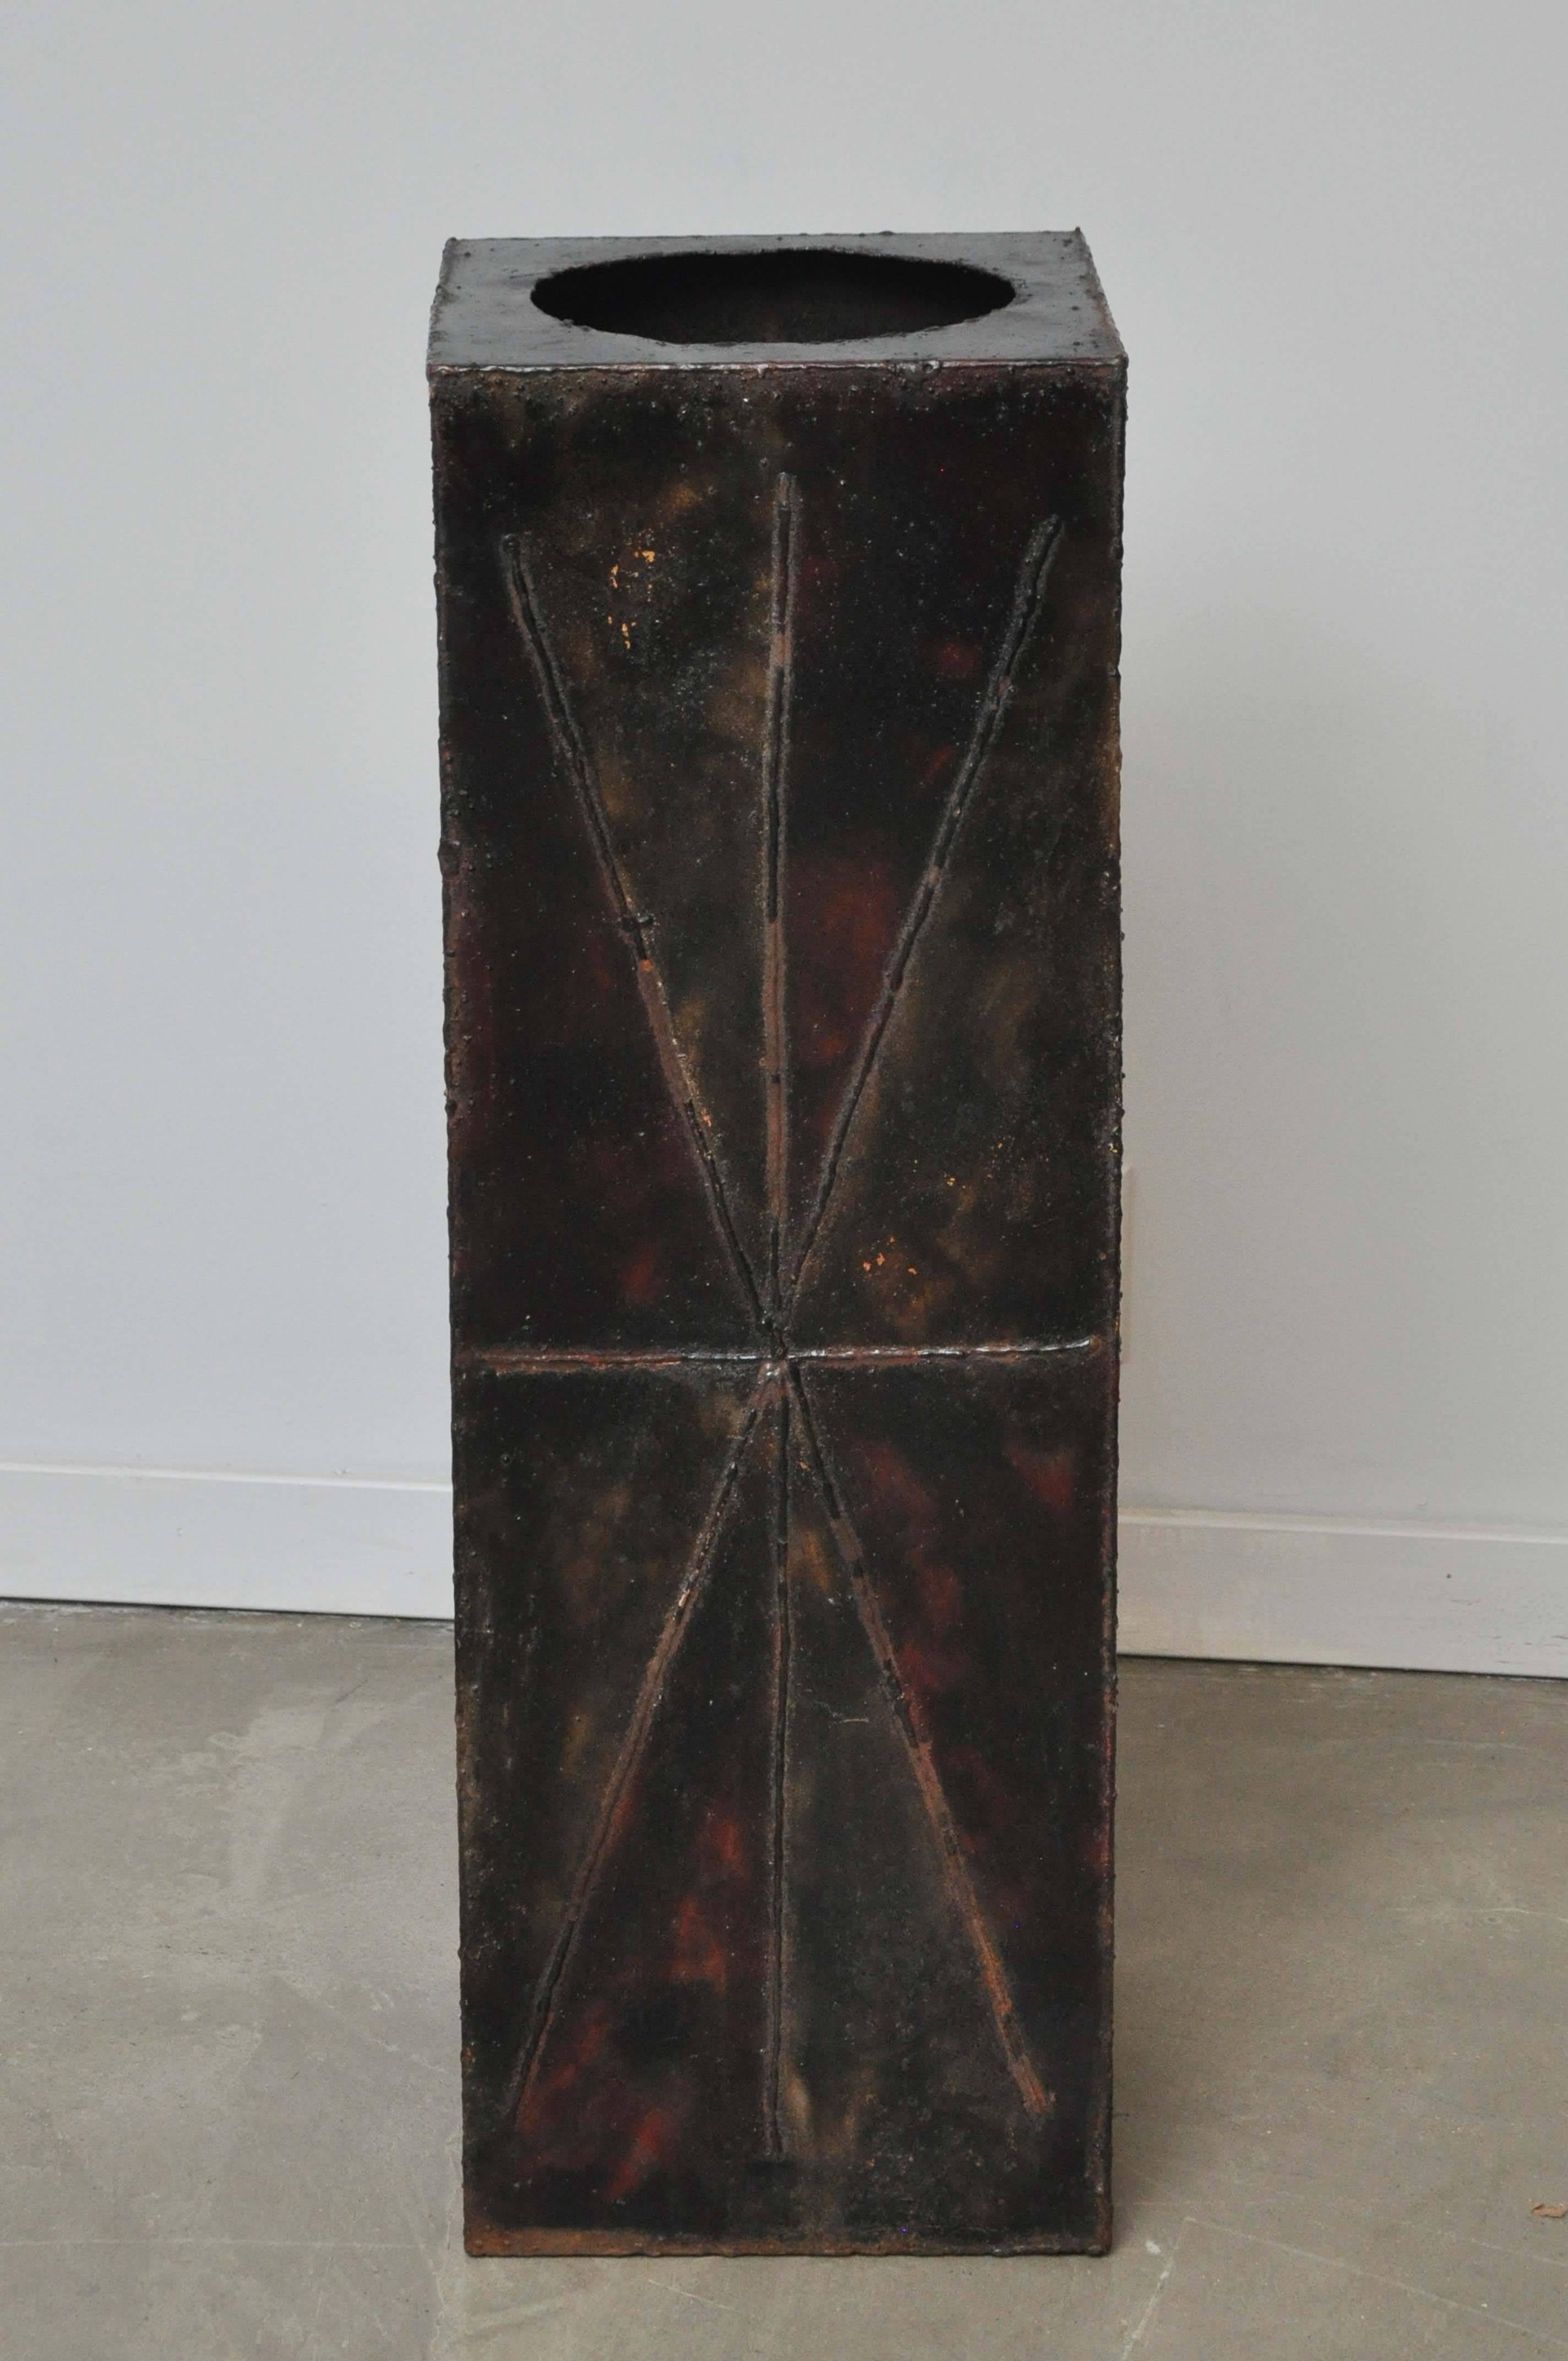 Rare large-scale planter by Paul Evans. Welded patinated steel still retains some color. Could add slate top to make a pedestal.